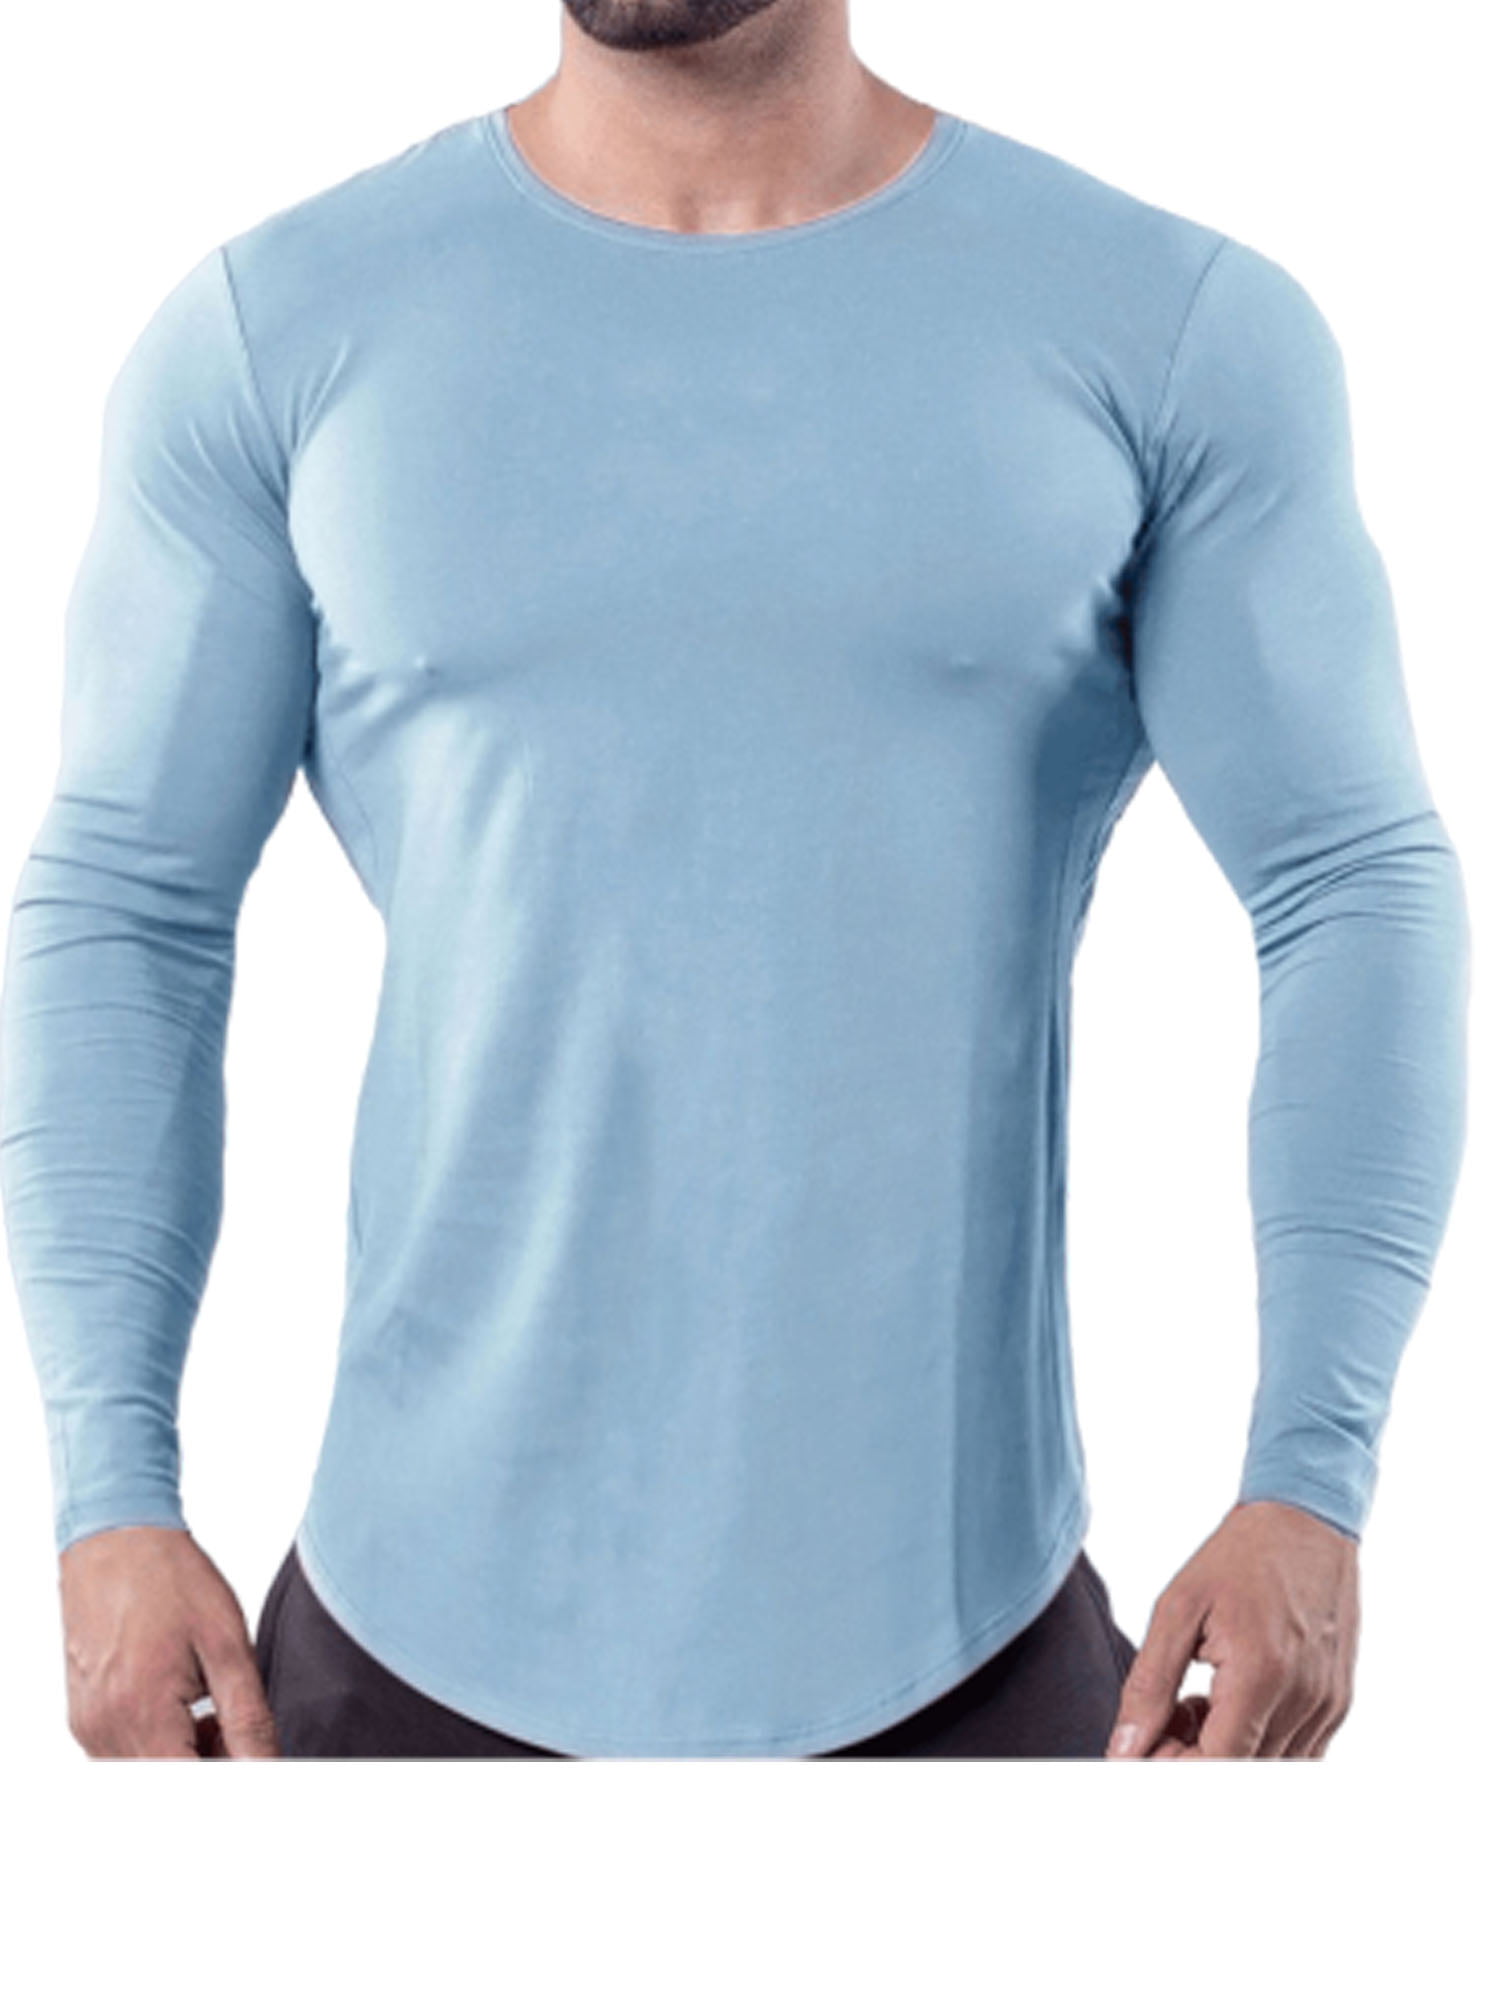 Details about   Men's Long Sleeve Compression Base Layer Muscle T-Shirt Sport Slim Fit Skin Tops 